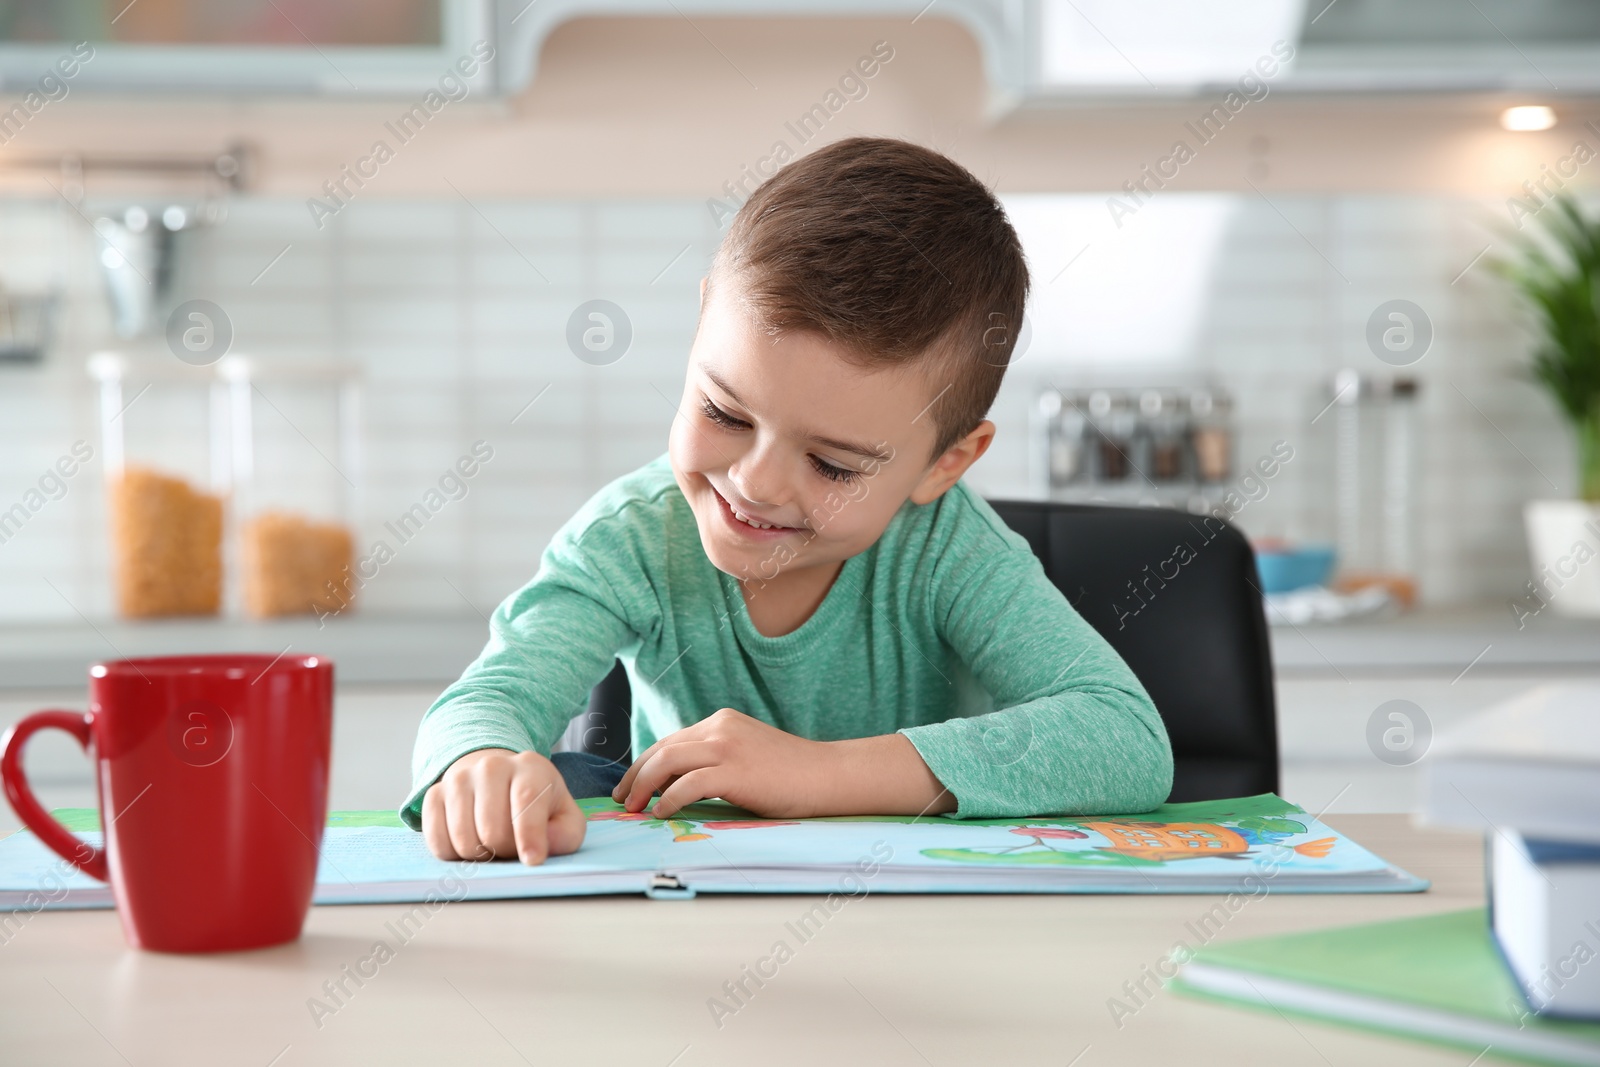 Photo of Cute little boy reading book at table in kitchen